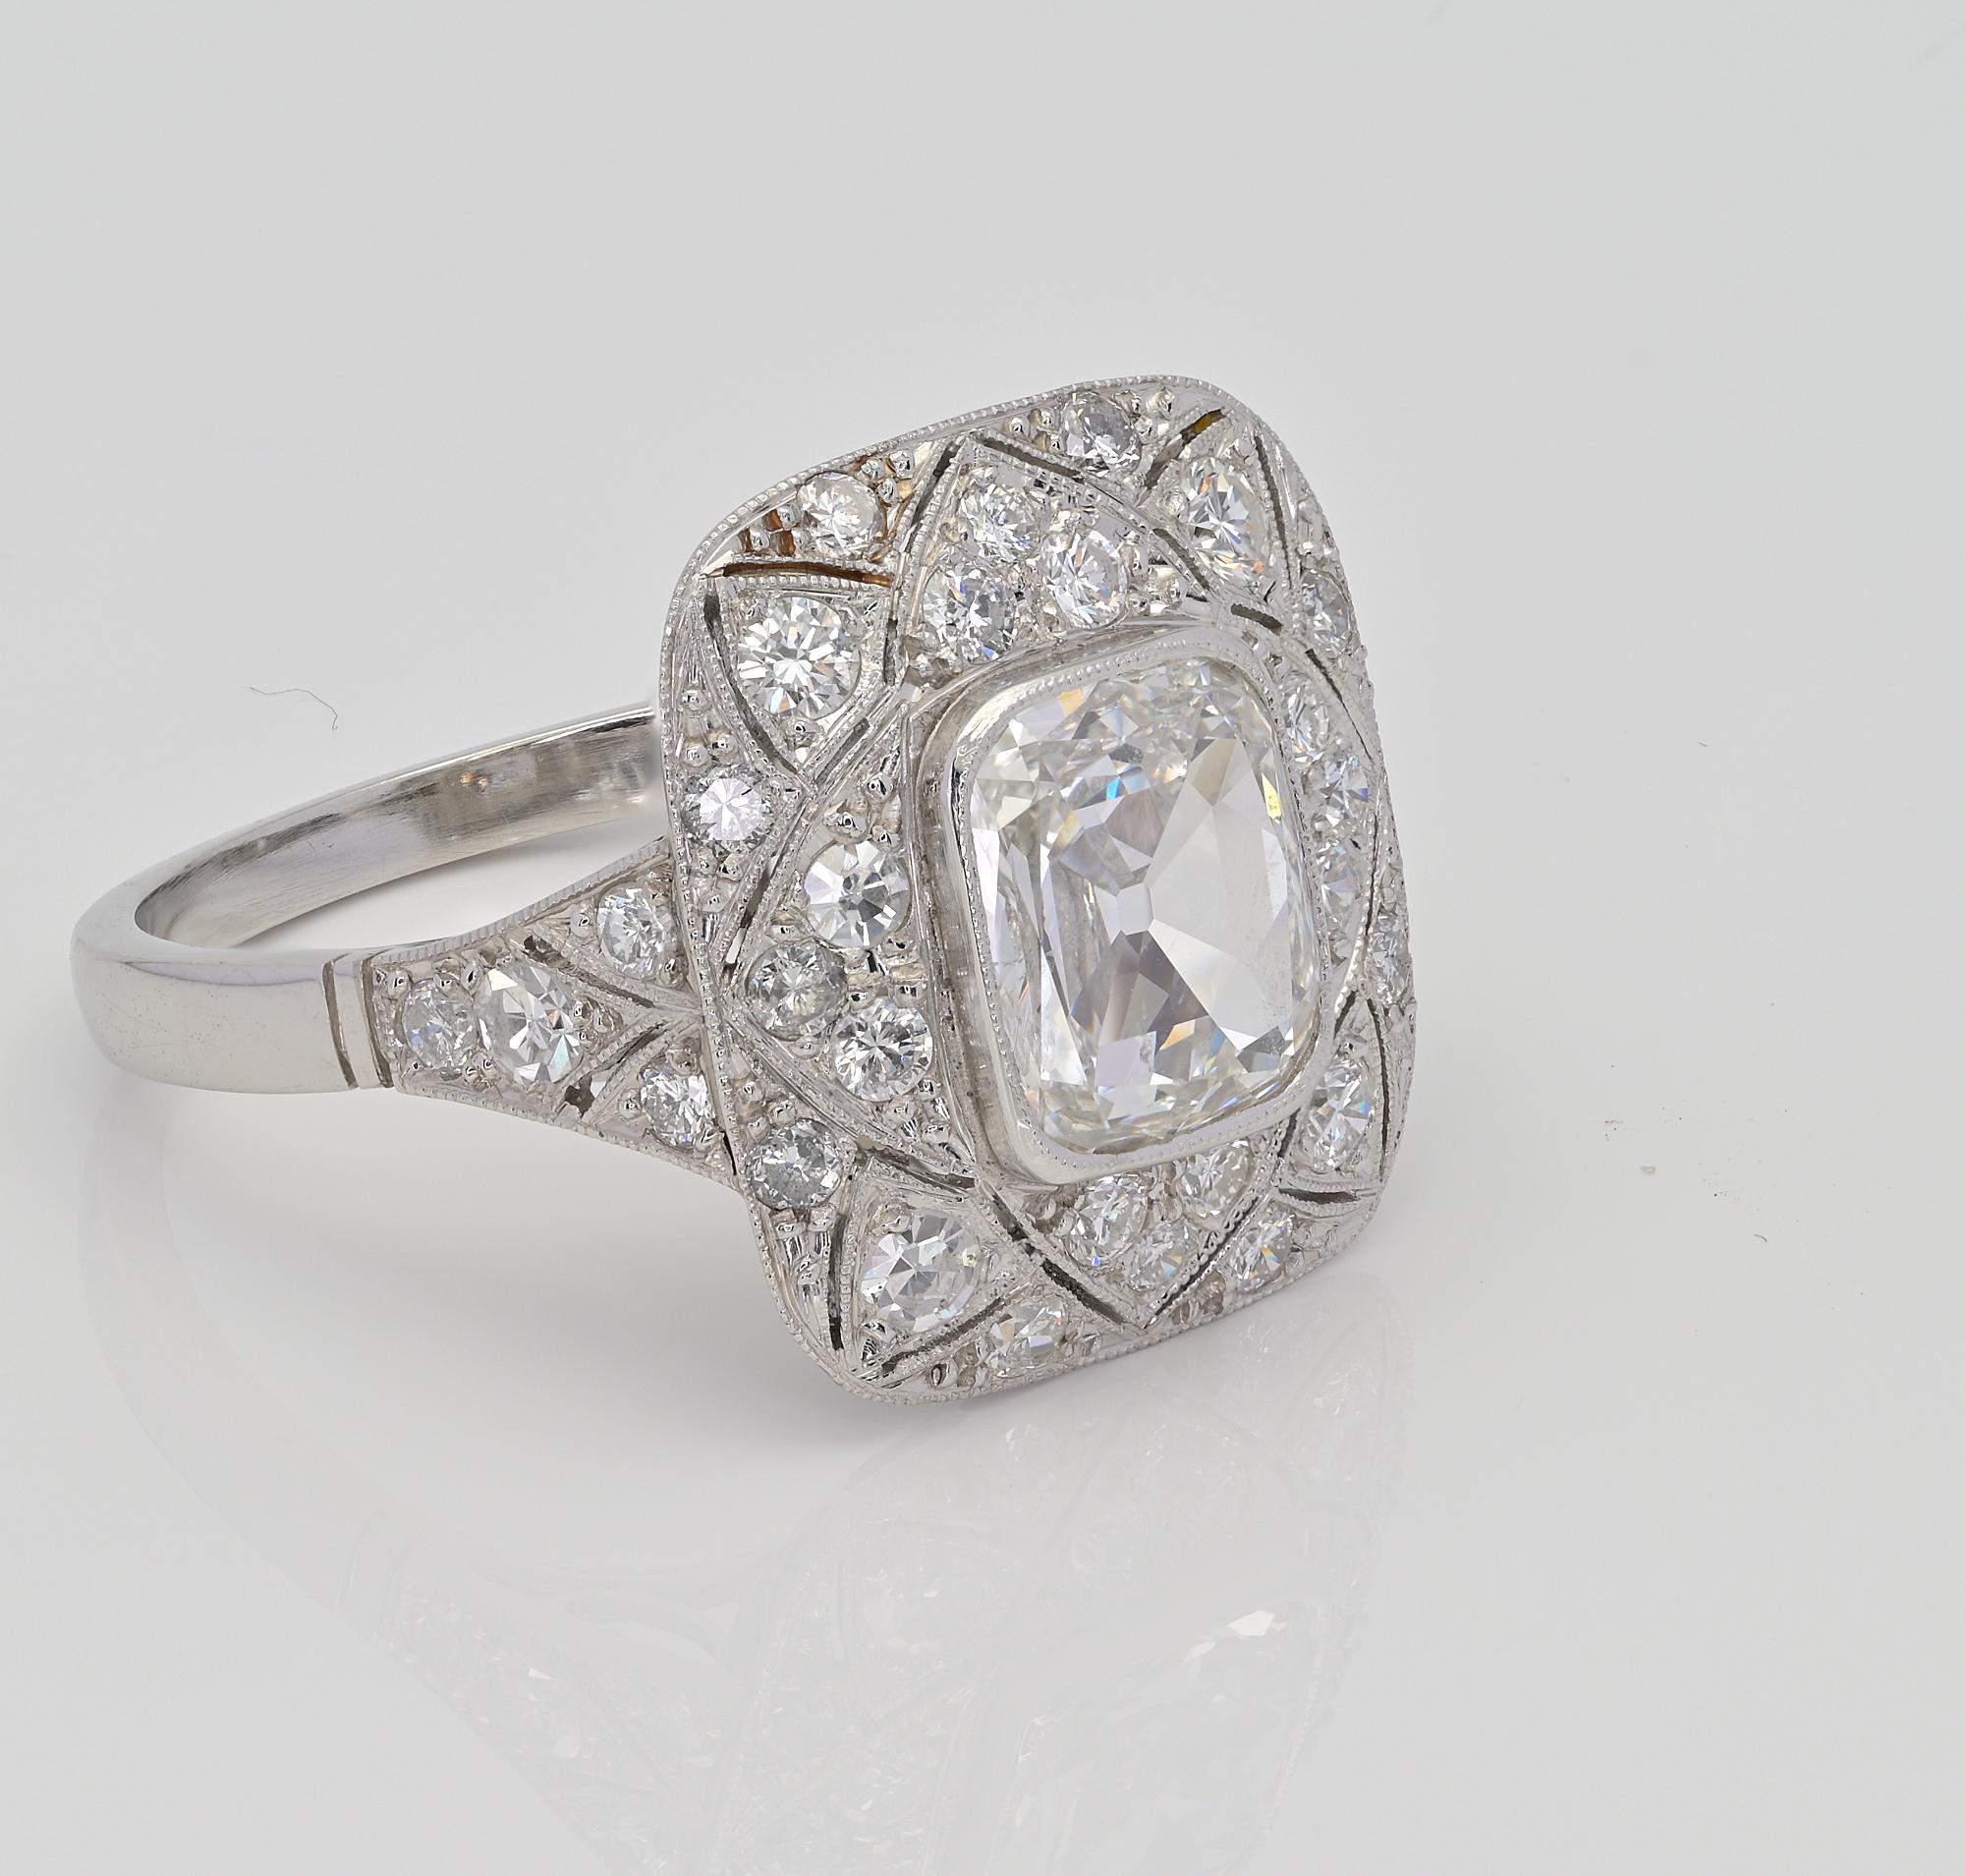 This exceptional antique ring is Belle Époque era, is 1910 ca
Hand crafted Platinum mount
The wide fine crown has an elegant pierced work Diamond frame with exquisite millgrain detailing delineating the artwork that hosts the main Diamond, beautiful